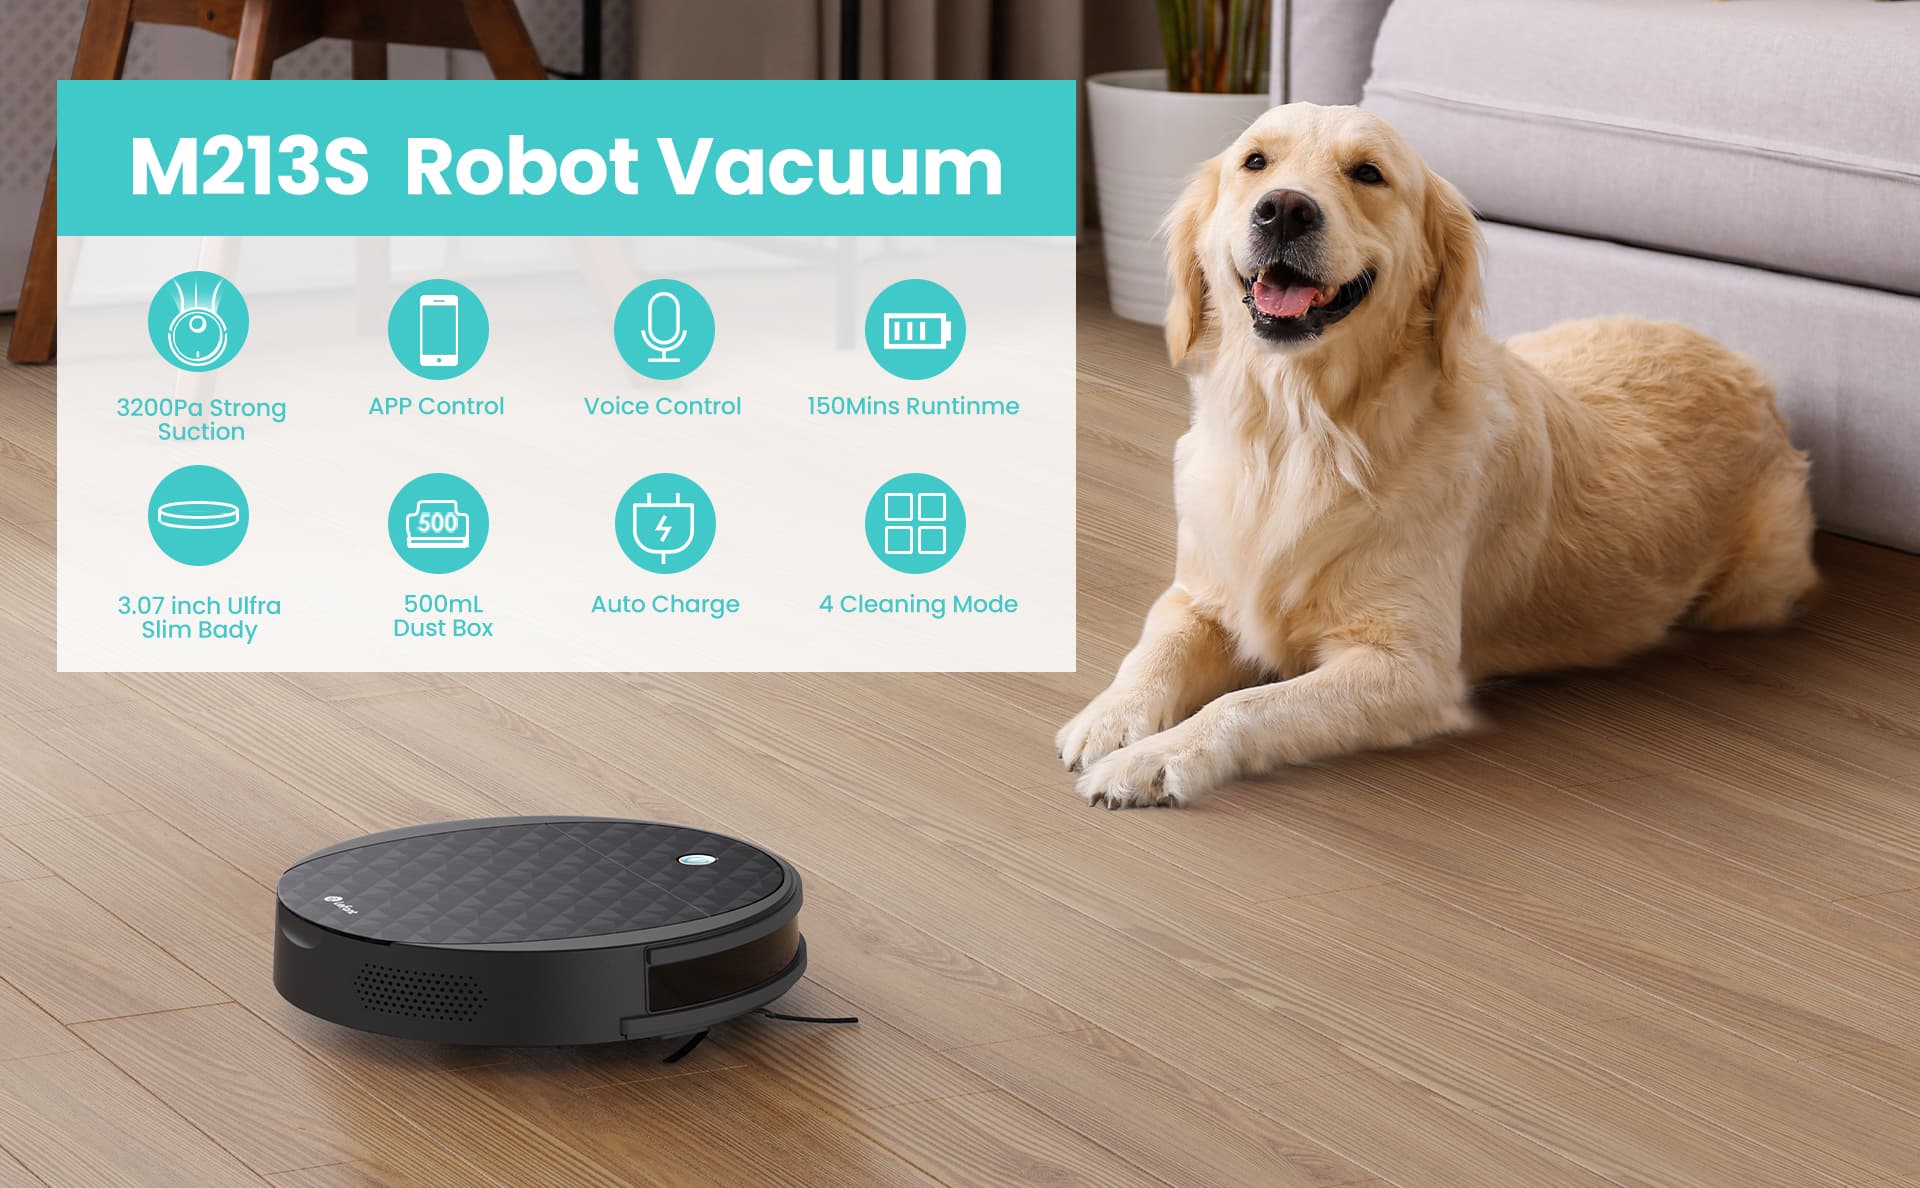 Lefant Robot Vacuum Cleaner with 2200Pa Powerful  Suction,Tangle-Free,Wi-Fi/App/Alexa,Featured 6 Cleaning Modes,Self-Charging  Slim Robotic Vacuum